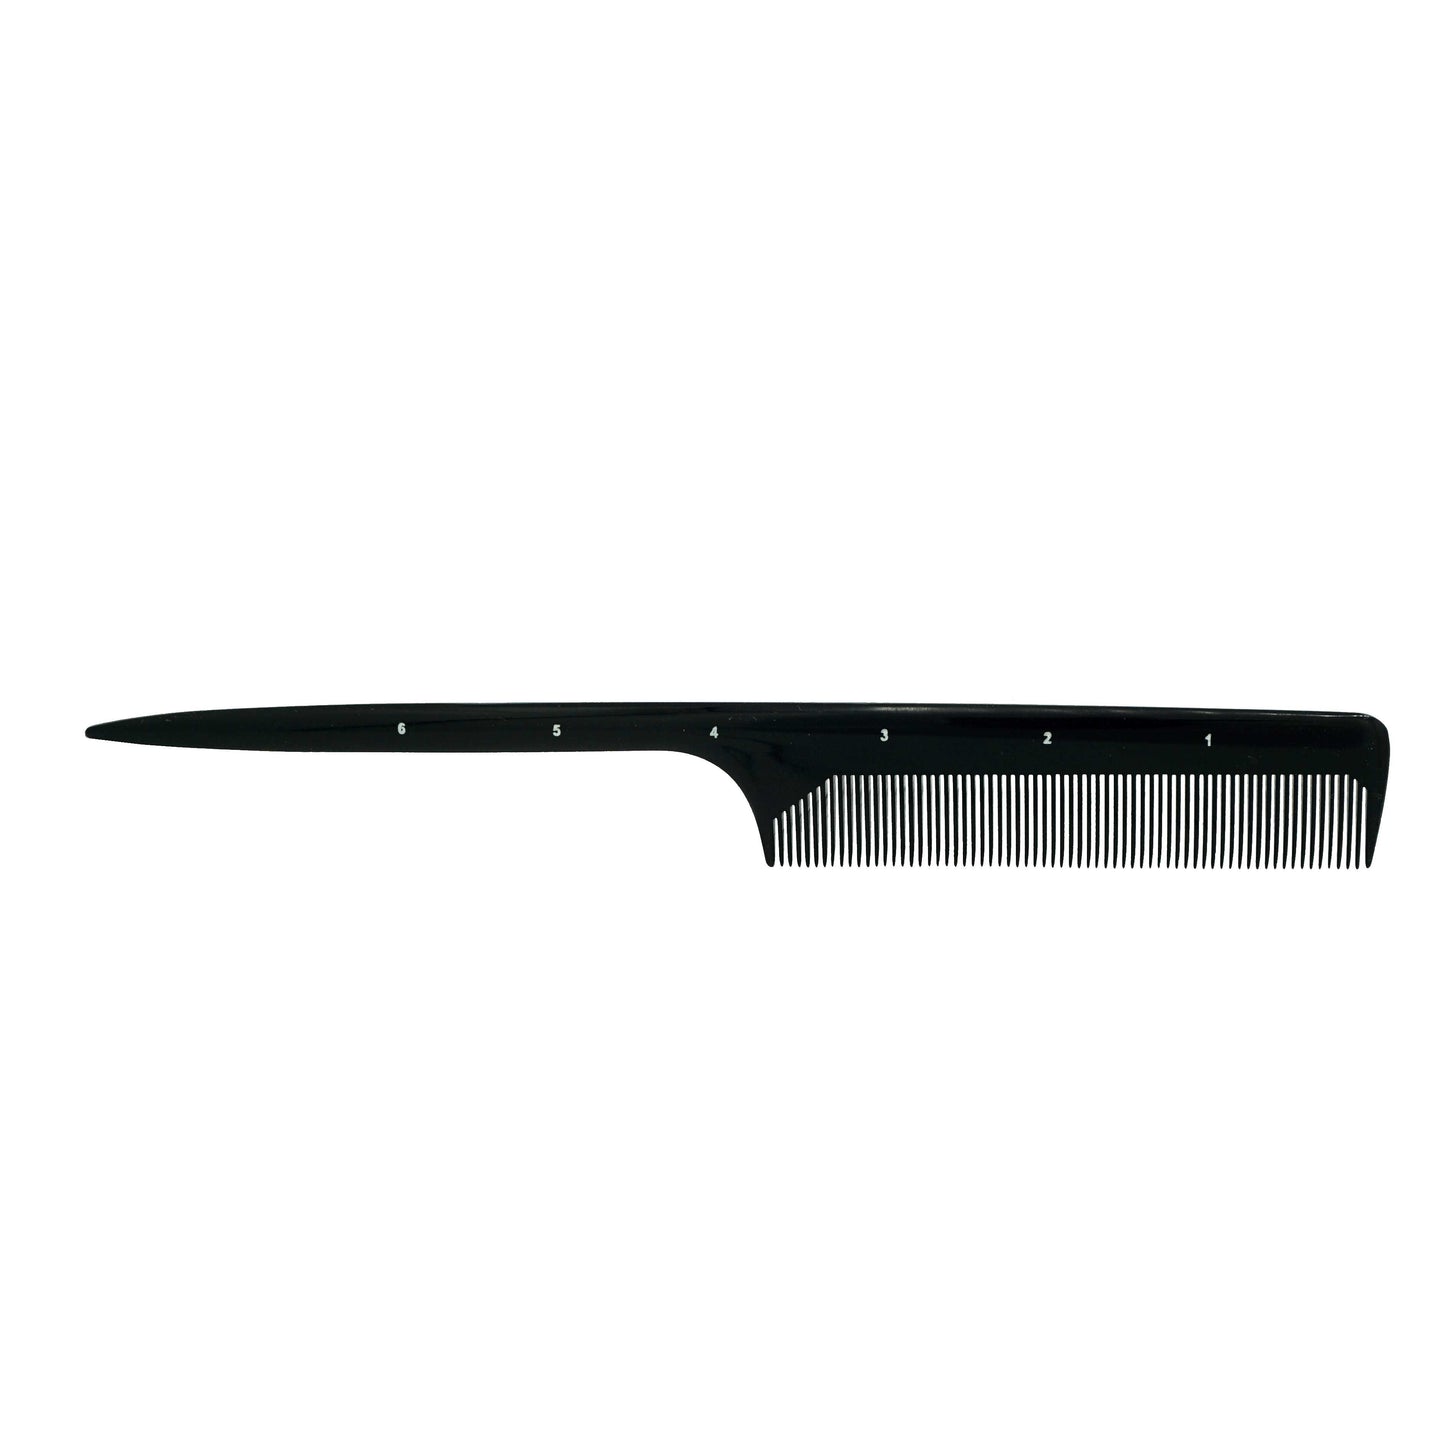 Pegasus 121, 8in Hard Rubber Course Tooth Rat Tail Comb, Handmade, Seamless, Smooth Edges, Anti Static, Heat and Chemically Resistant, Great for Parting, Coloring Hair | Peines de goma dura - Black